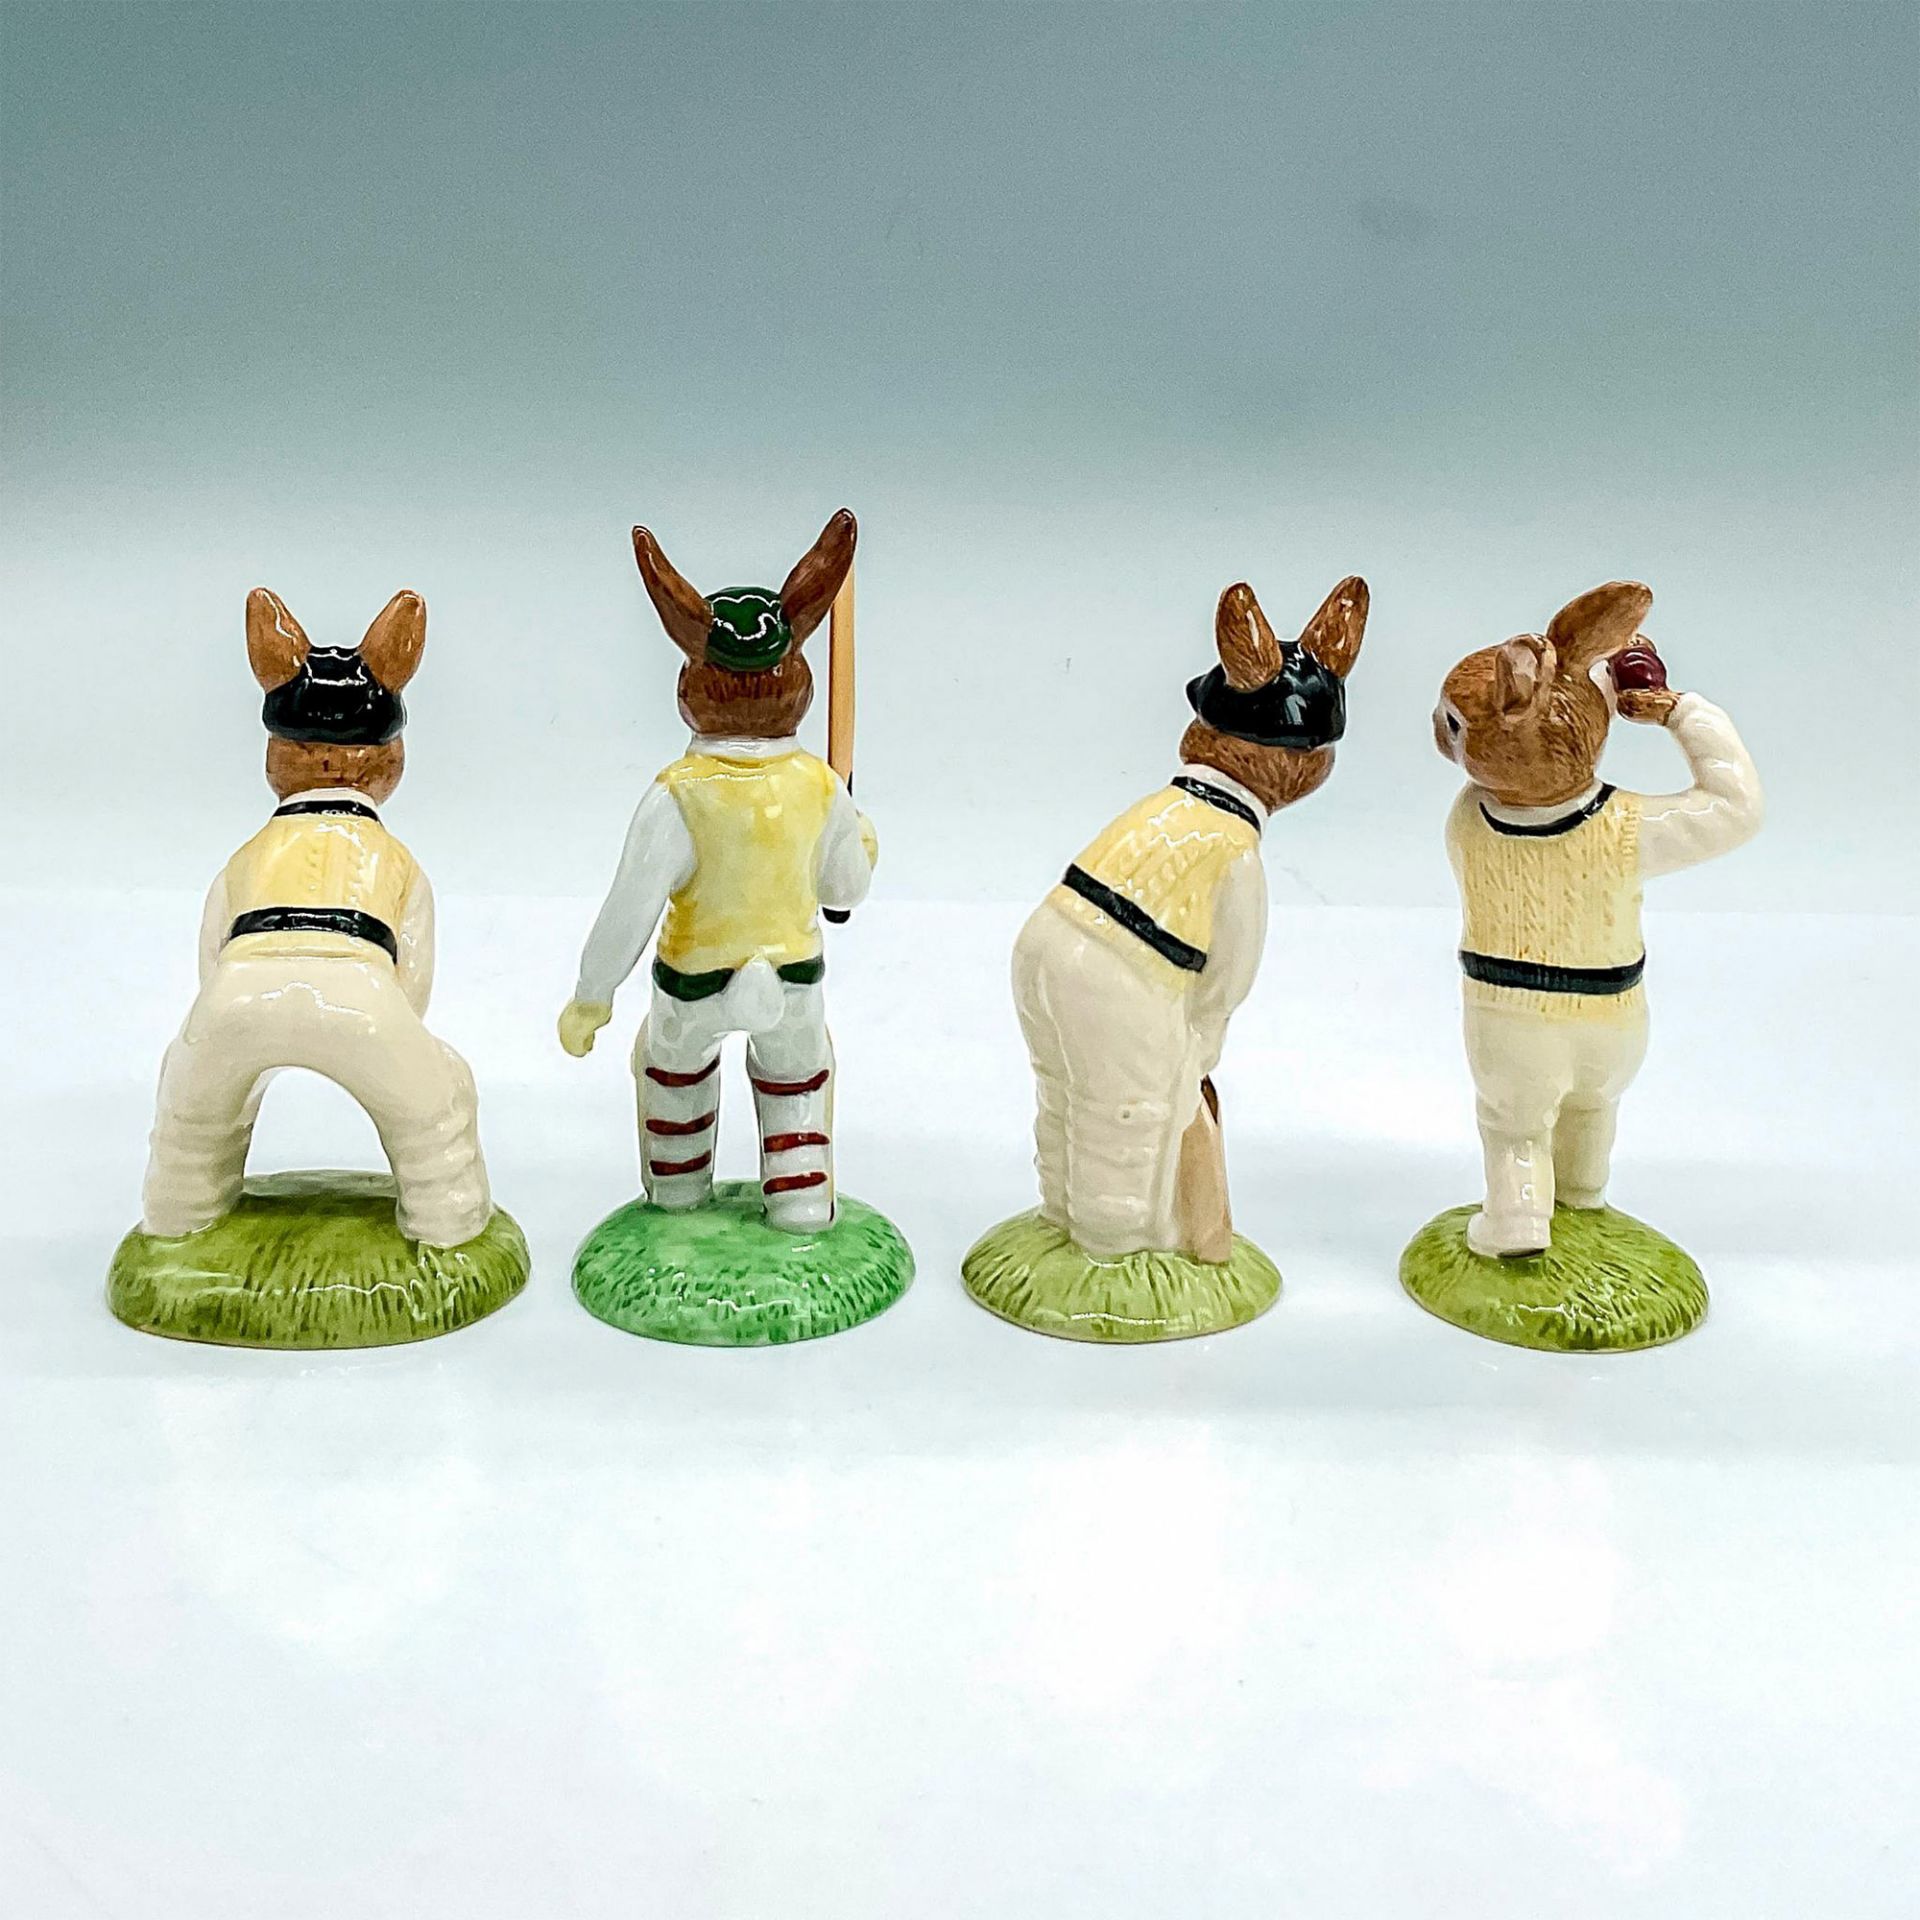 4pc Royal Doulton Bunnykins Figurines, Cricket Players - Image 2 of 3